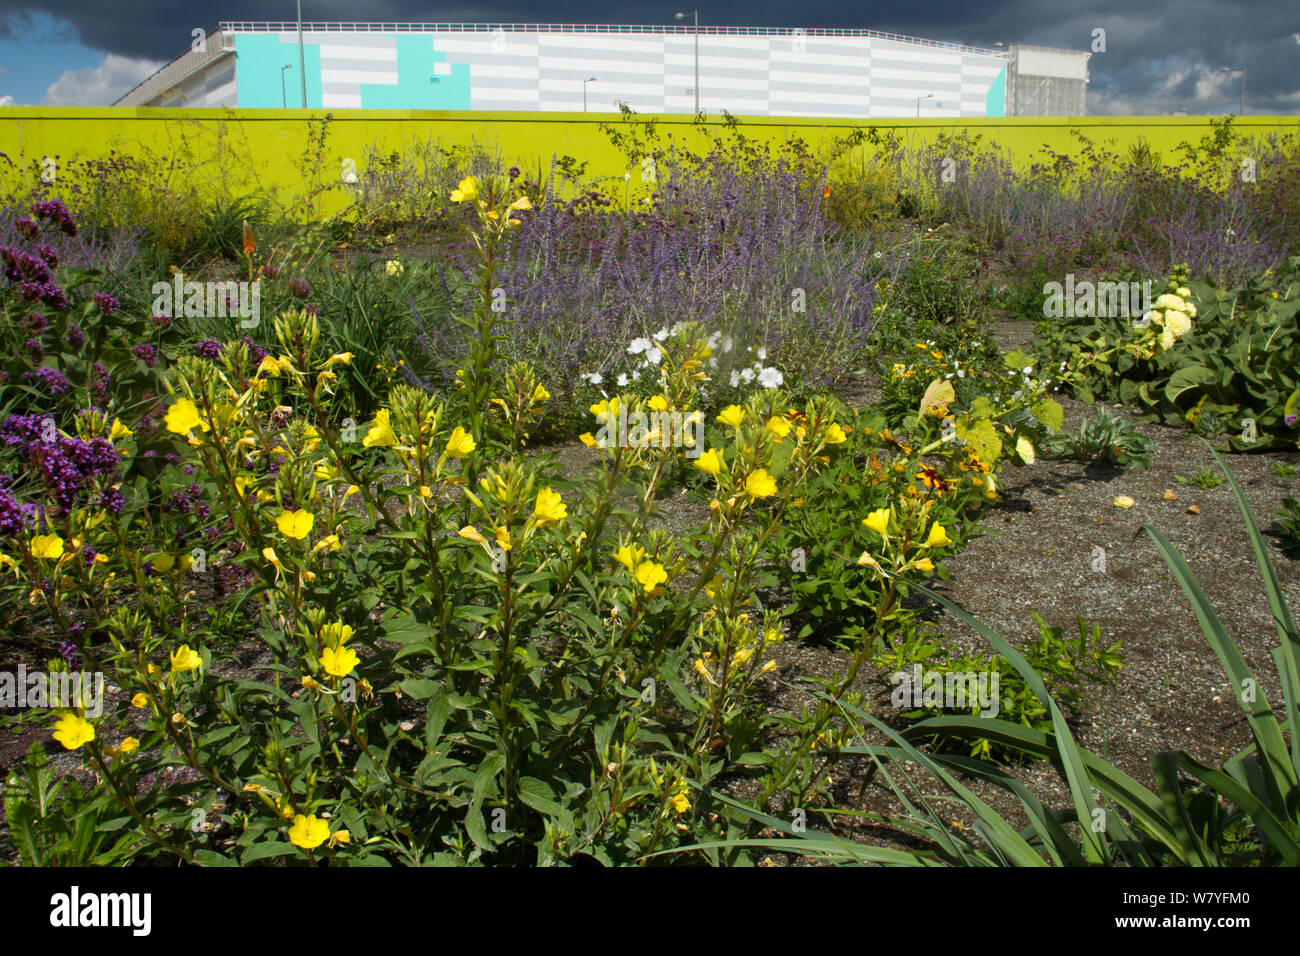 Mixture of flowering plants including evening primrose (Oenothera biennis) planted to attract bees in formerly derelict land surrounding Olympic stadium. Queen Elizabeth Olympic Park, Stratford, London, England, UK, August 2014. Stock Photo